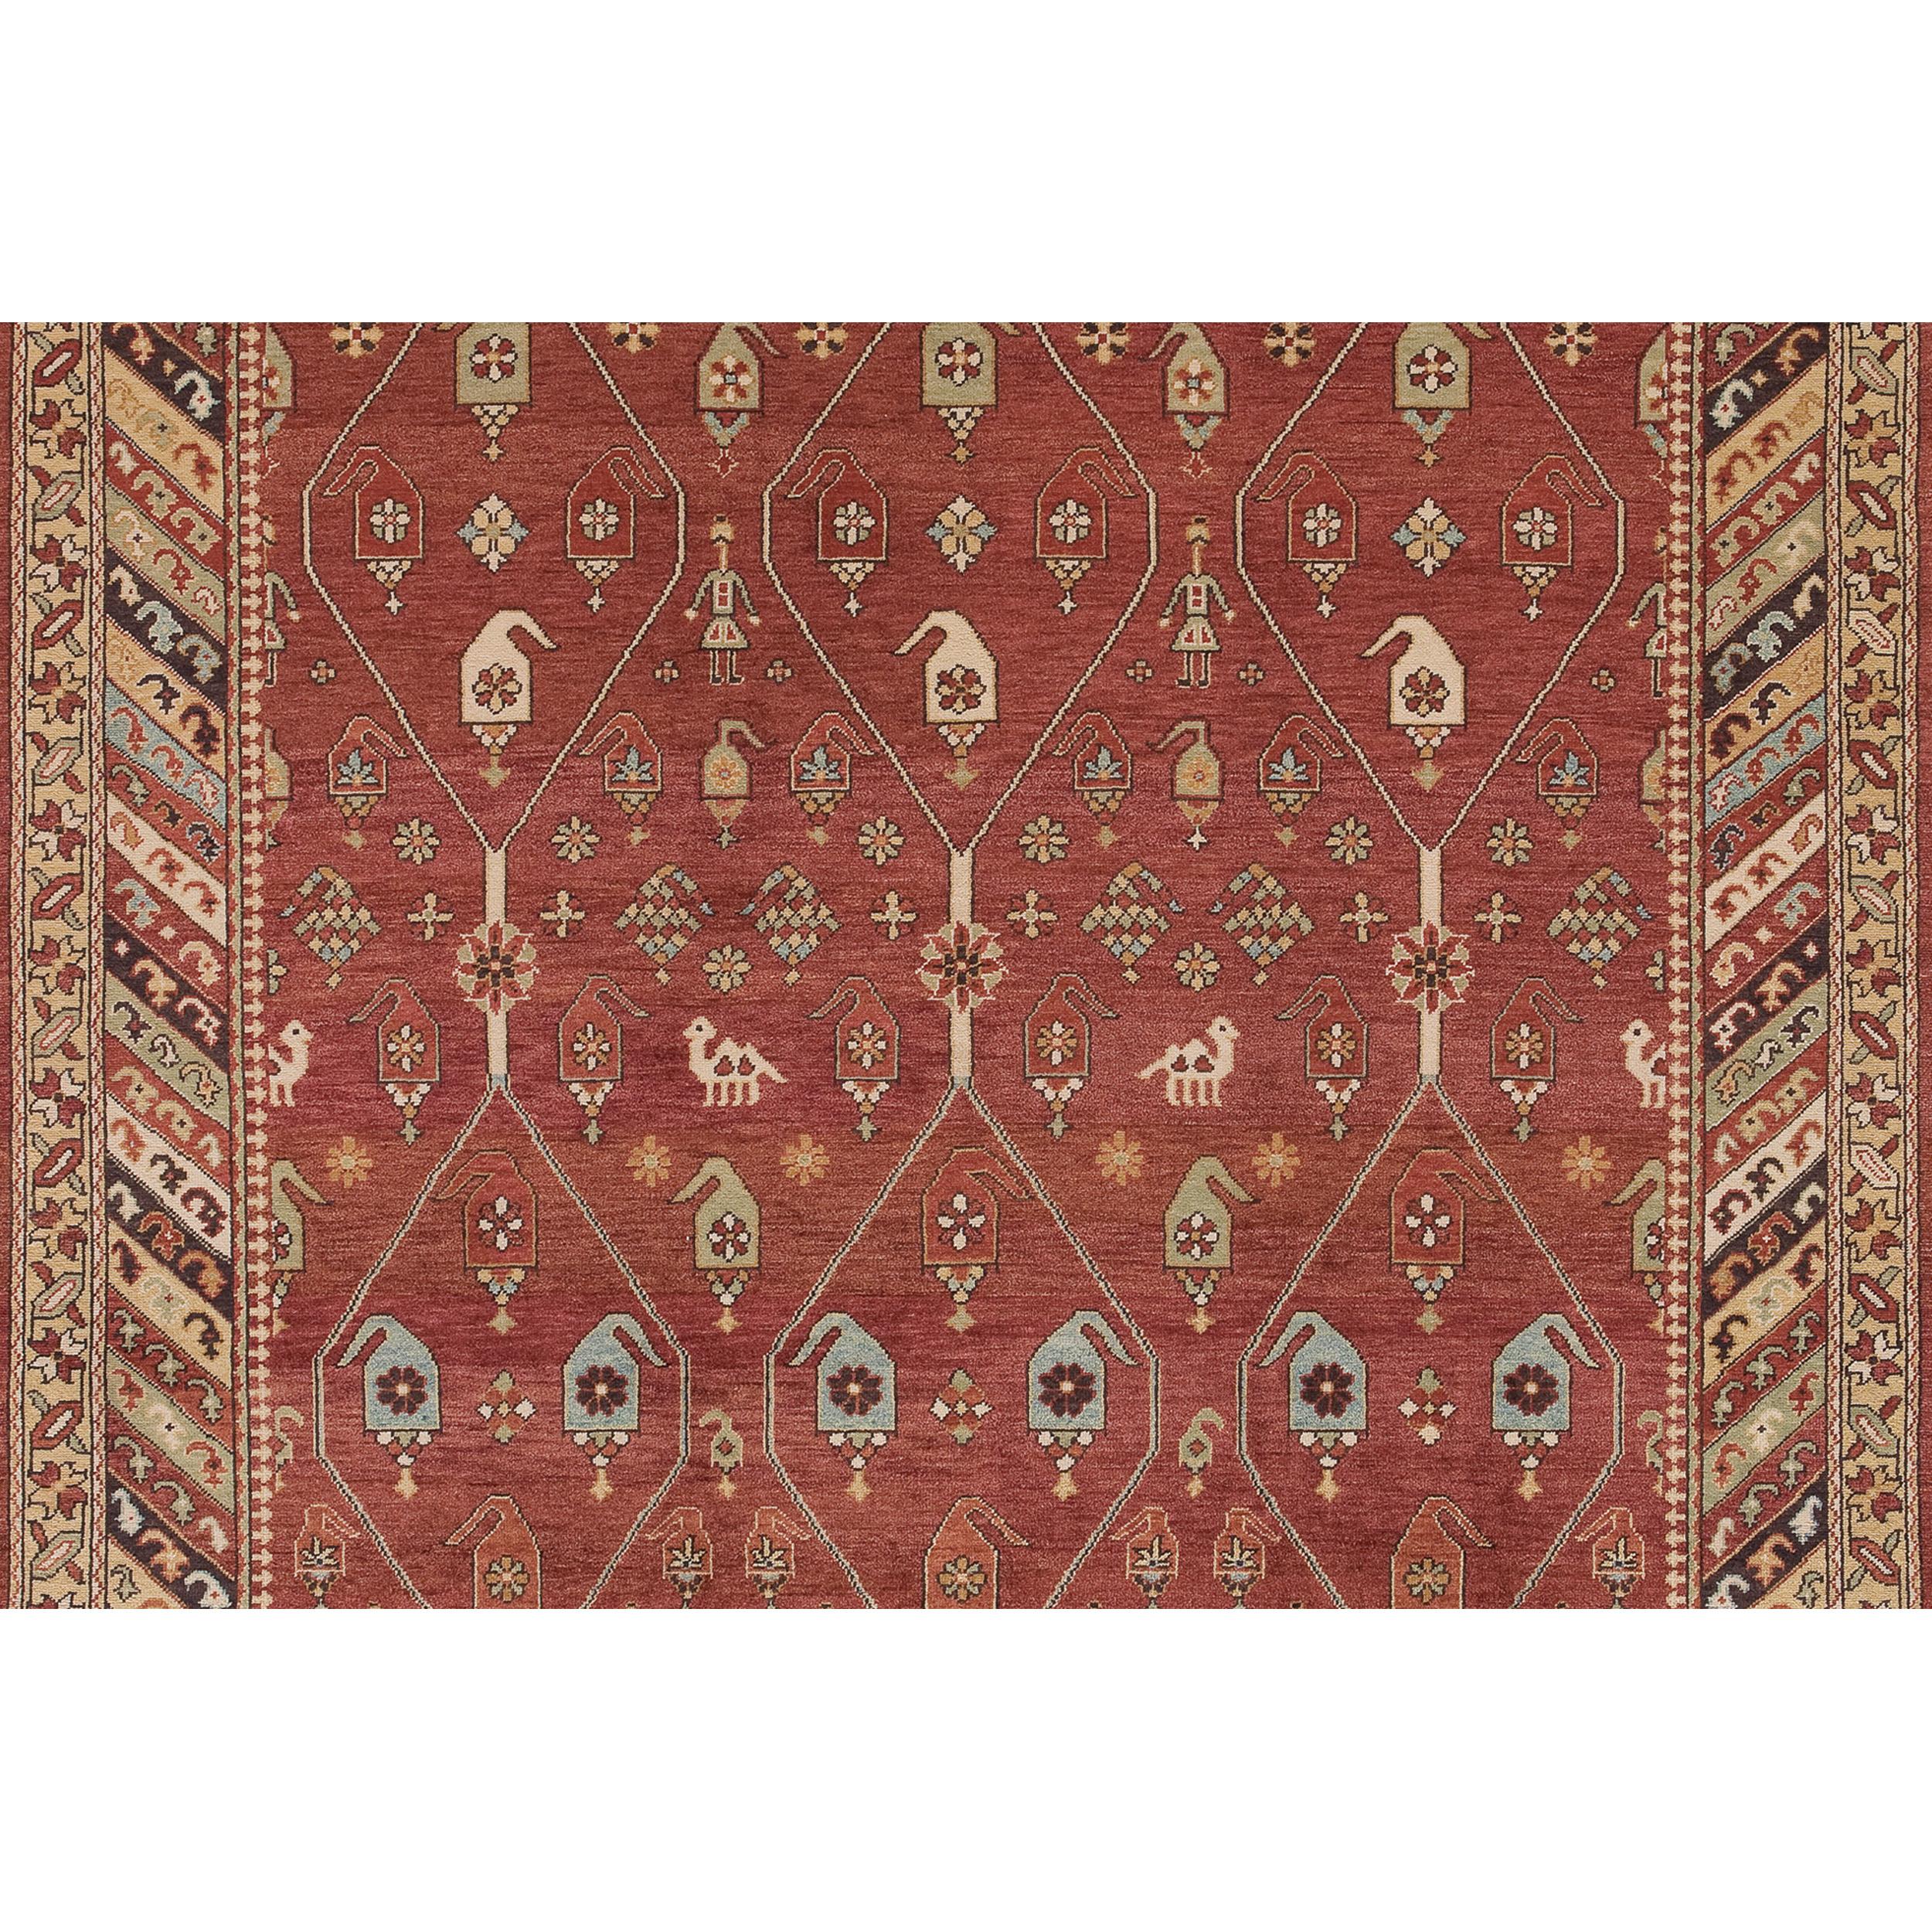 Luxury Traditional Hand-Knotted Red/Brown 11x18 Rug In New Condition For Sale In Secaucus, NJ